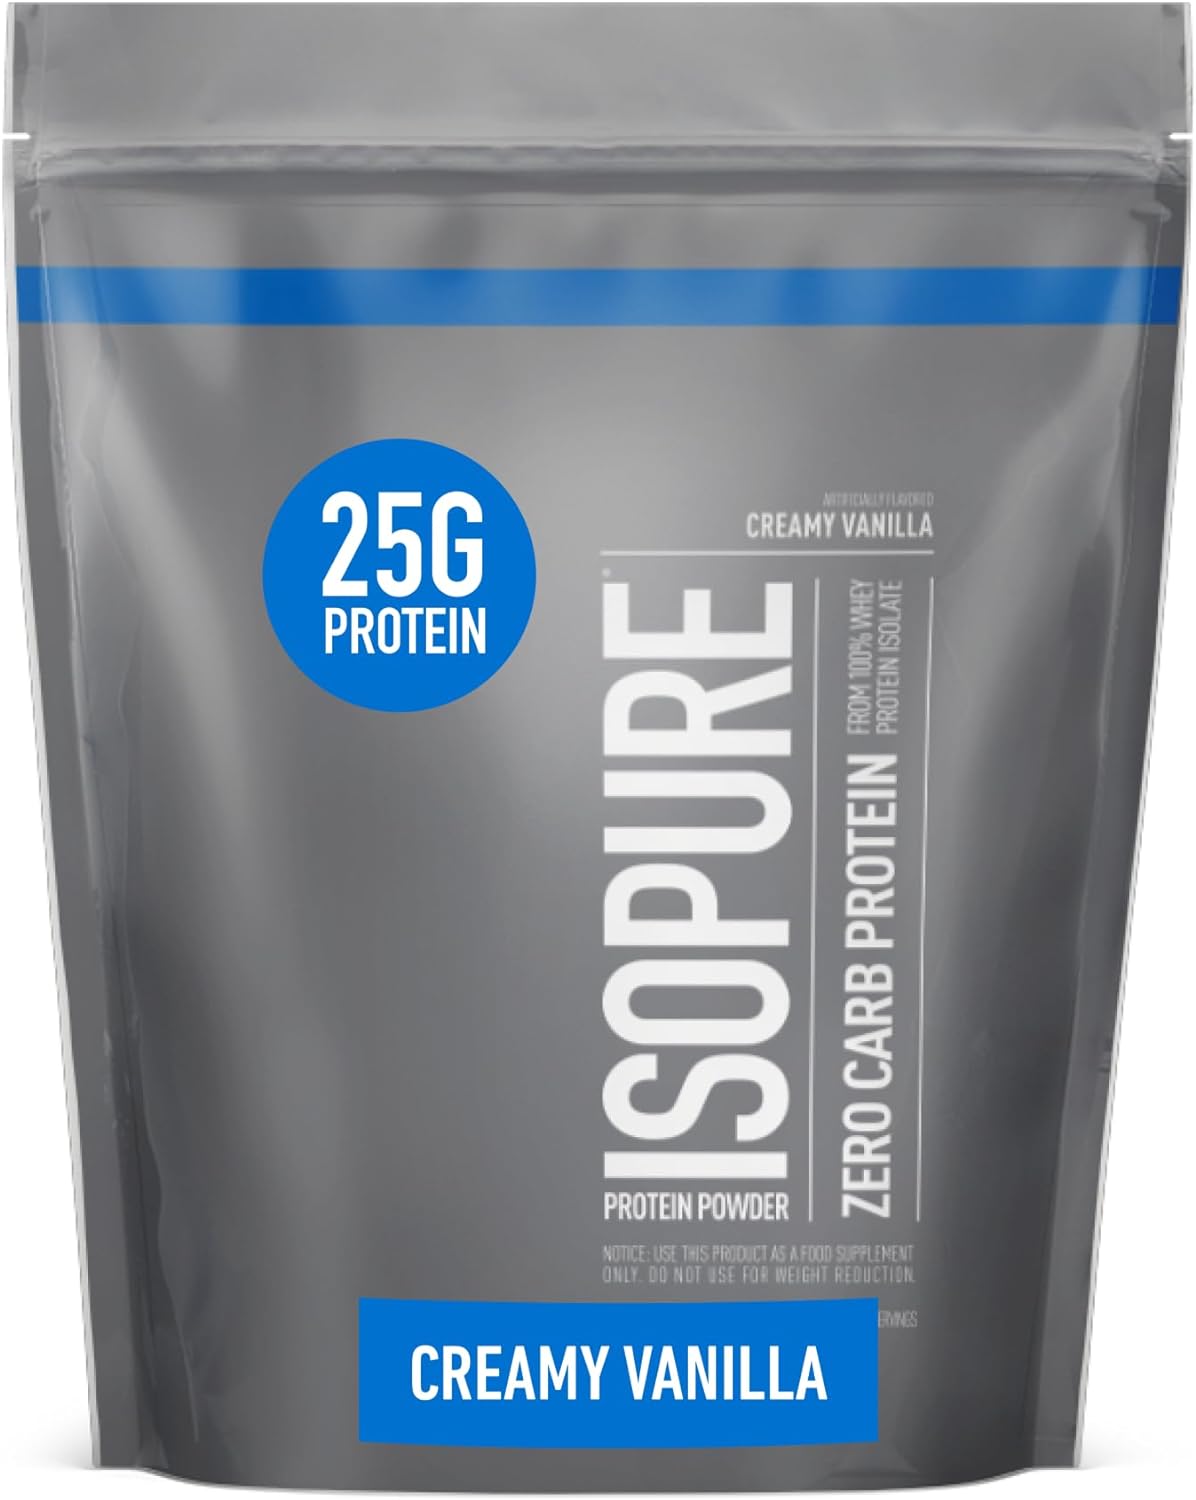 Isopure Creamy Vanilla Whey Isolate Protein Powder with Vitamin C & Zinc for Immune Support, 25g Protein, Zero Carb & Keto Friendly, 15 Servings, 1 Pound (Packaging May Vary)